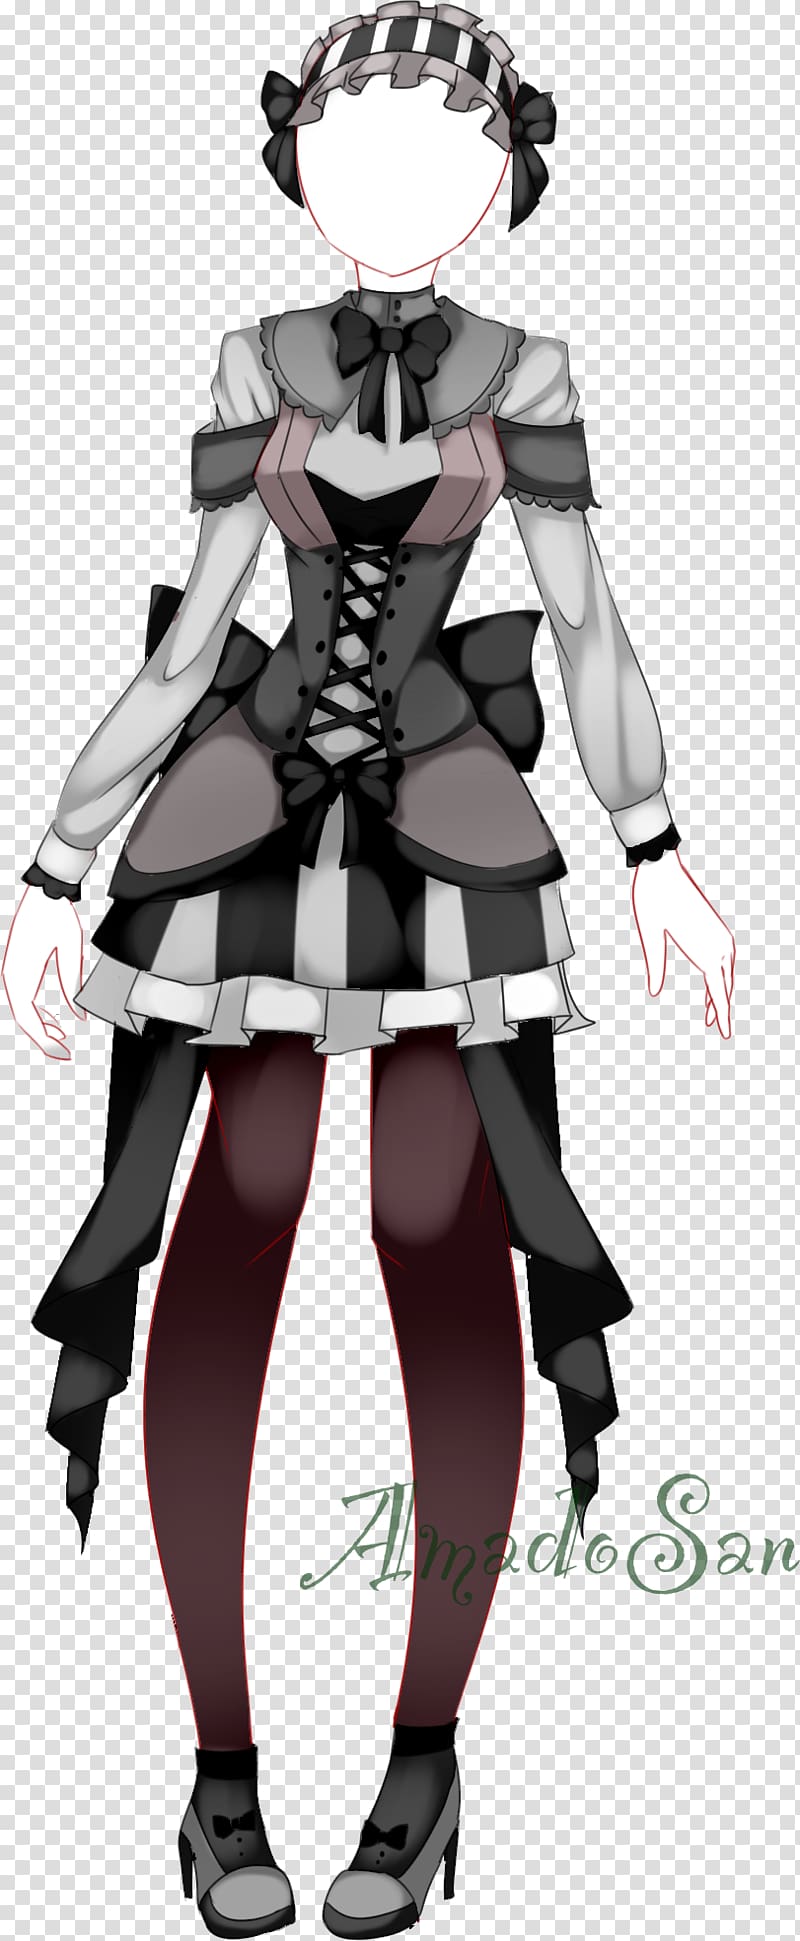 Anime Drawing Dress Clothing Lolita fashion, Anime transparent background PNG clipart